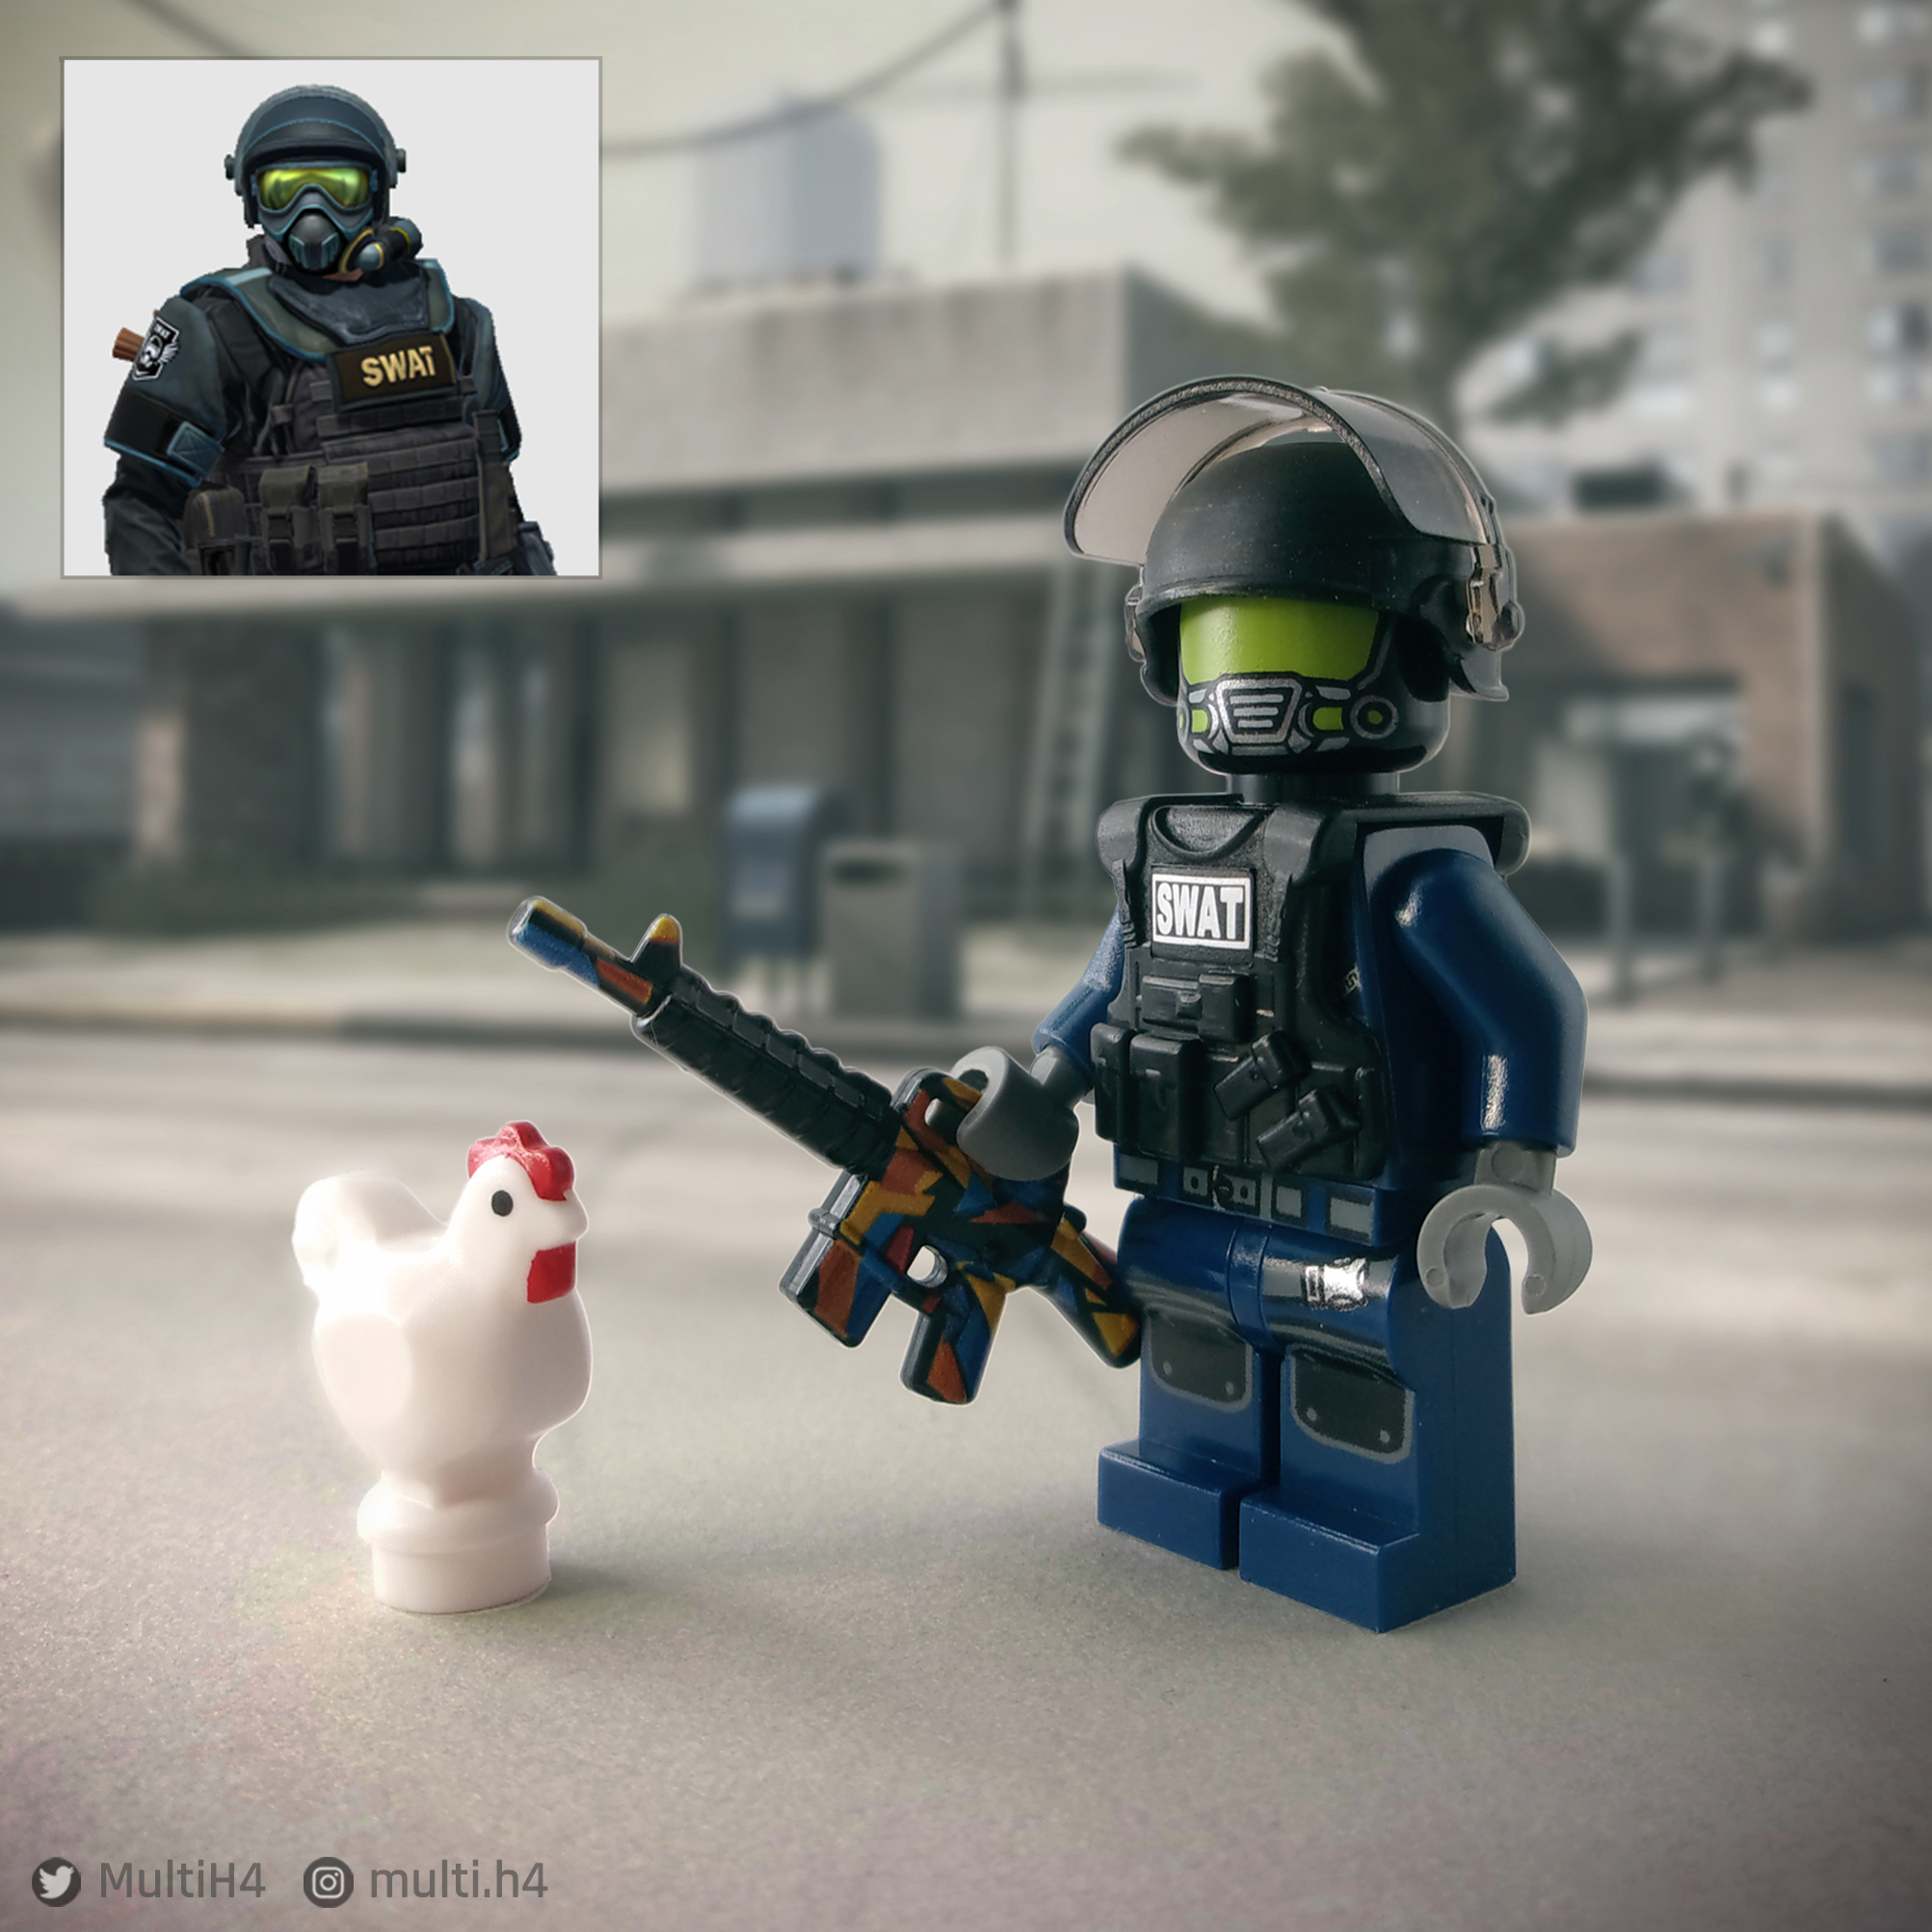 MultiH 🌊 on Twitter: "Made @CounterStrike Lego minifigure, this time representing Chem-Haz Specialist accompanied by a chicken friend of course. https://t.co/7imJisQVV4" / Twitter